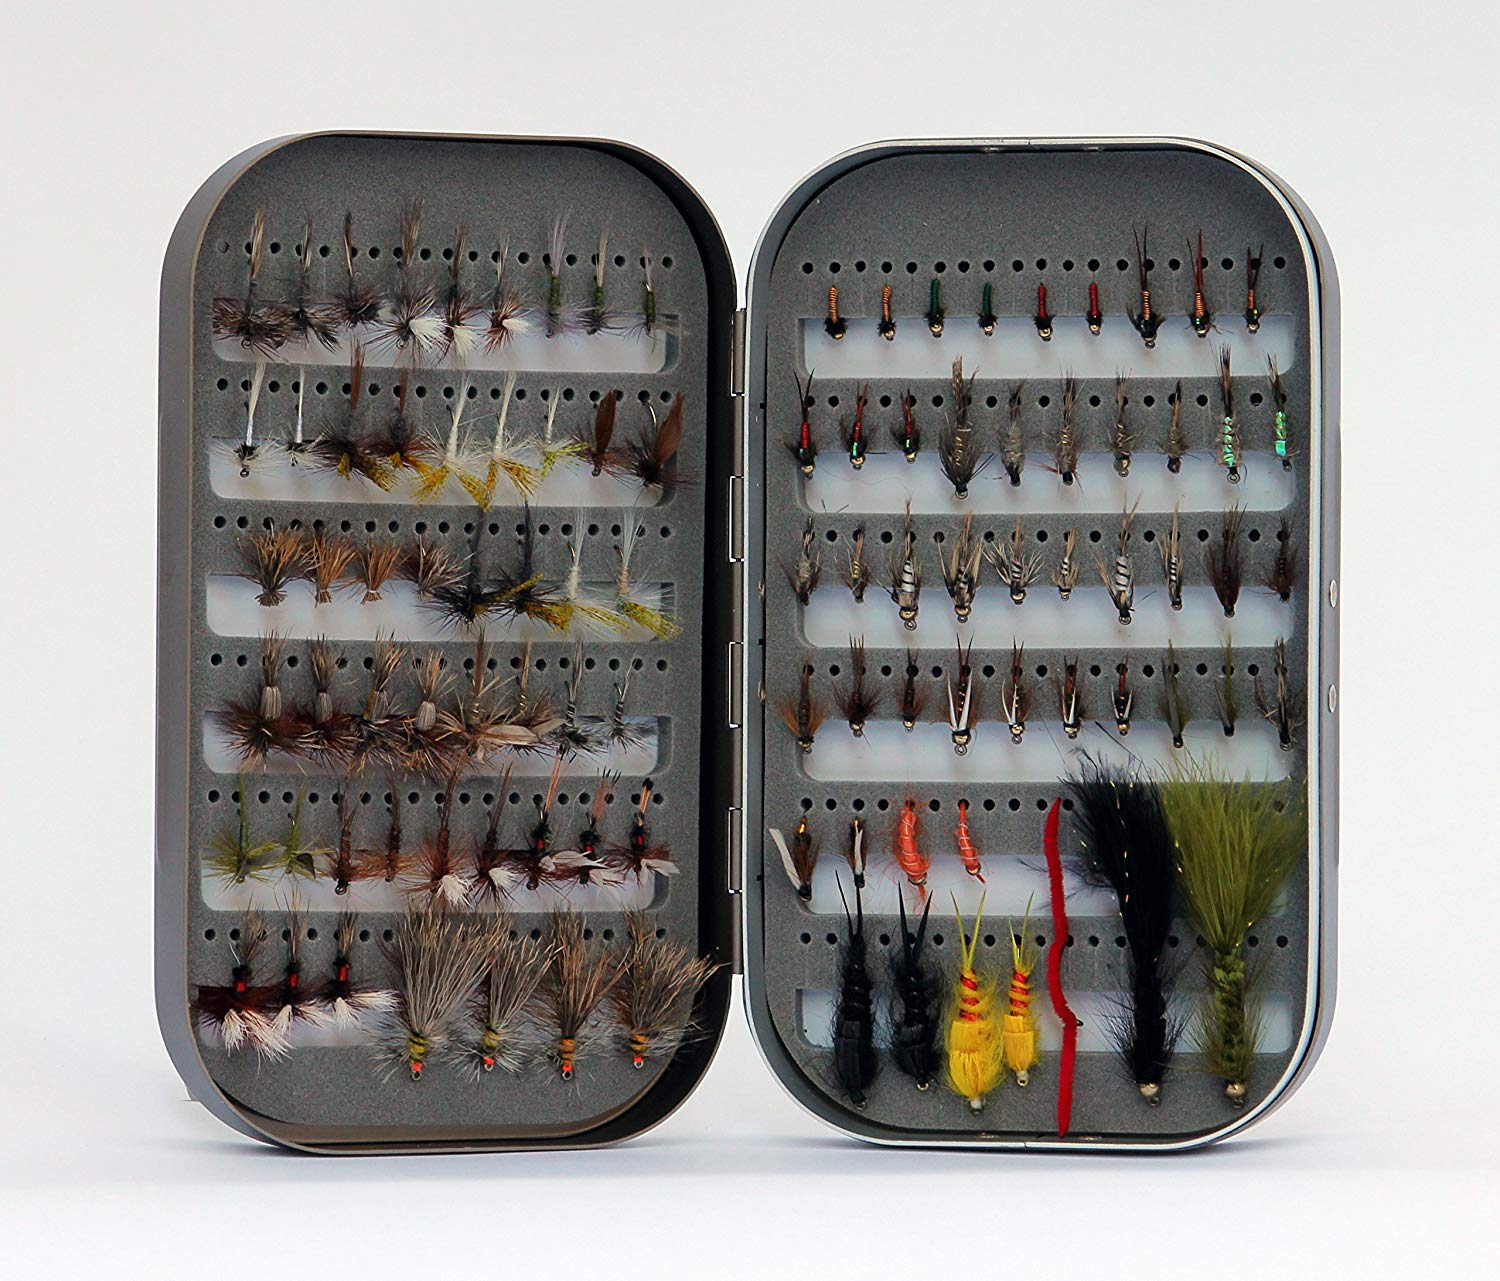 Nymphs SF Fly Fishing Box Flies Case Waterproof Salt-Rresistant Thick Strong Fly Lure Box Deep Slot for Hooks Bead,and so on Dries Streamers